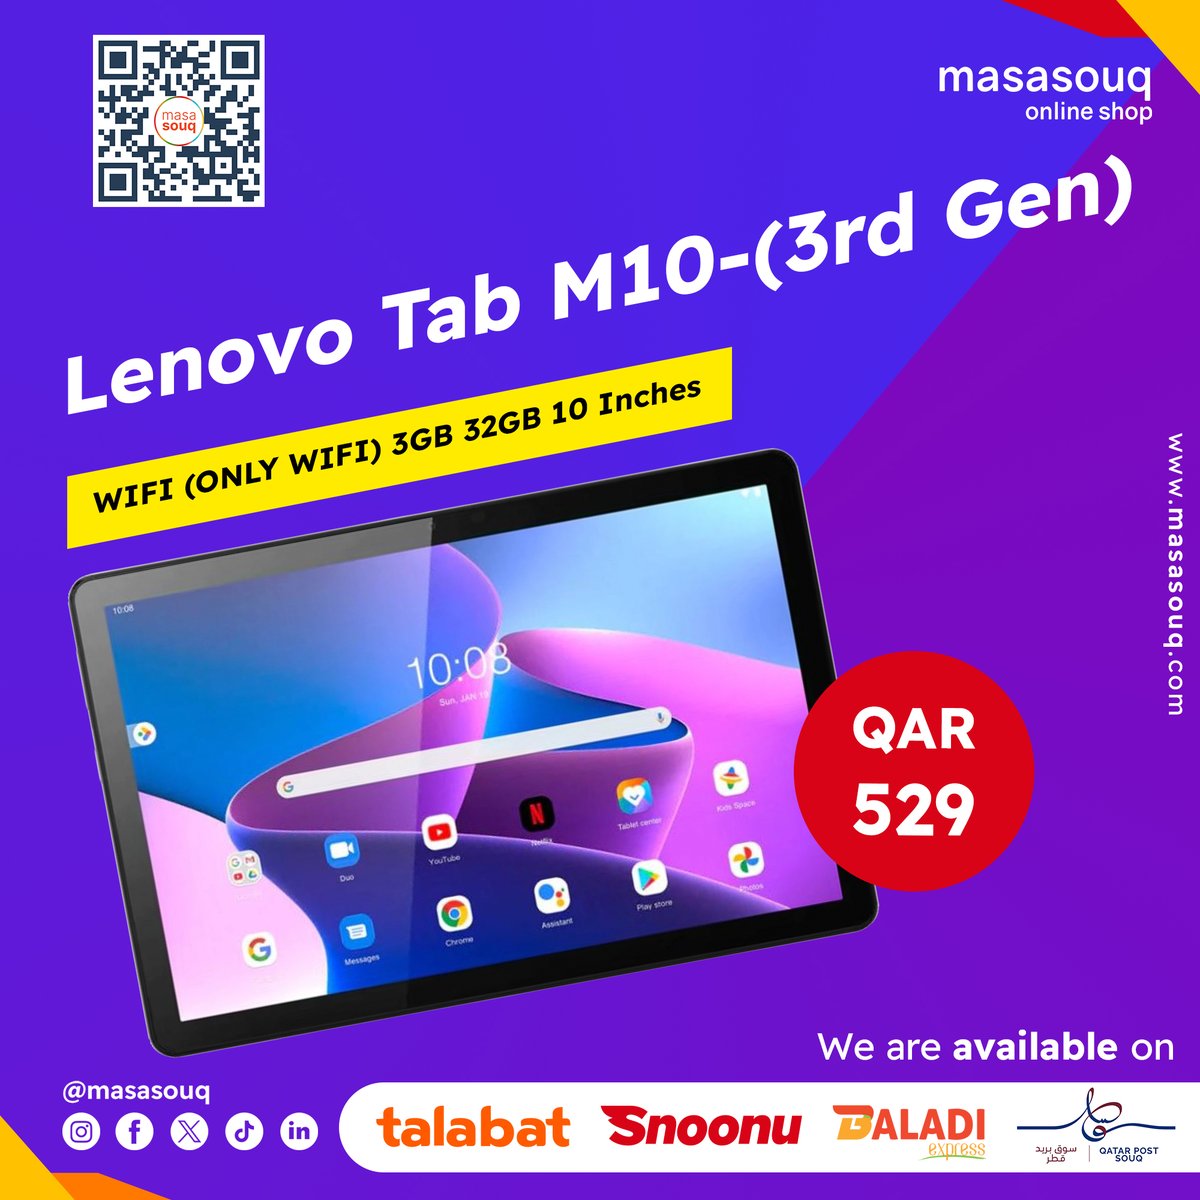 Upgrade your tech game! Lenovo Tab M10 (3rd Gen) for only QAR529. Order yours: masasouq.com/lenovo-tab-m10…   #Lenovo #tabletdeals #musthavetech #masasouq 🤩